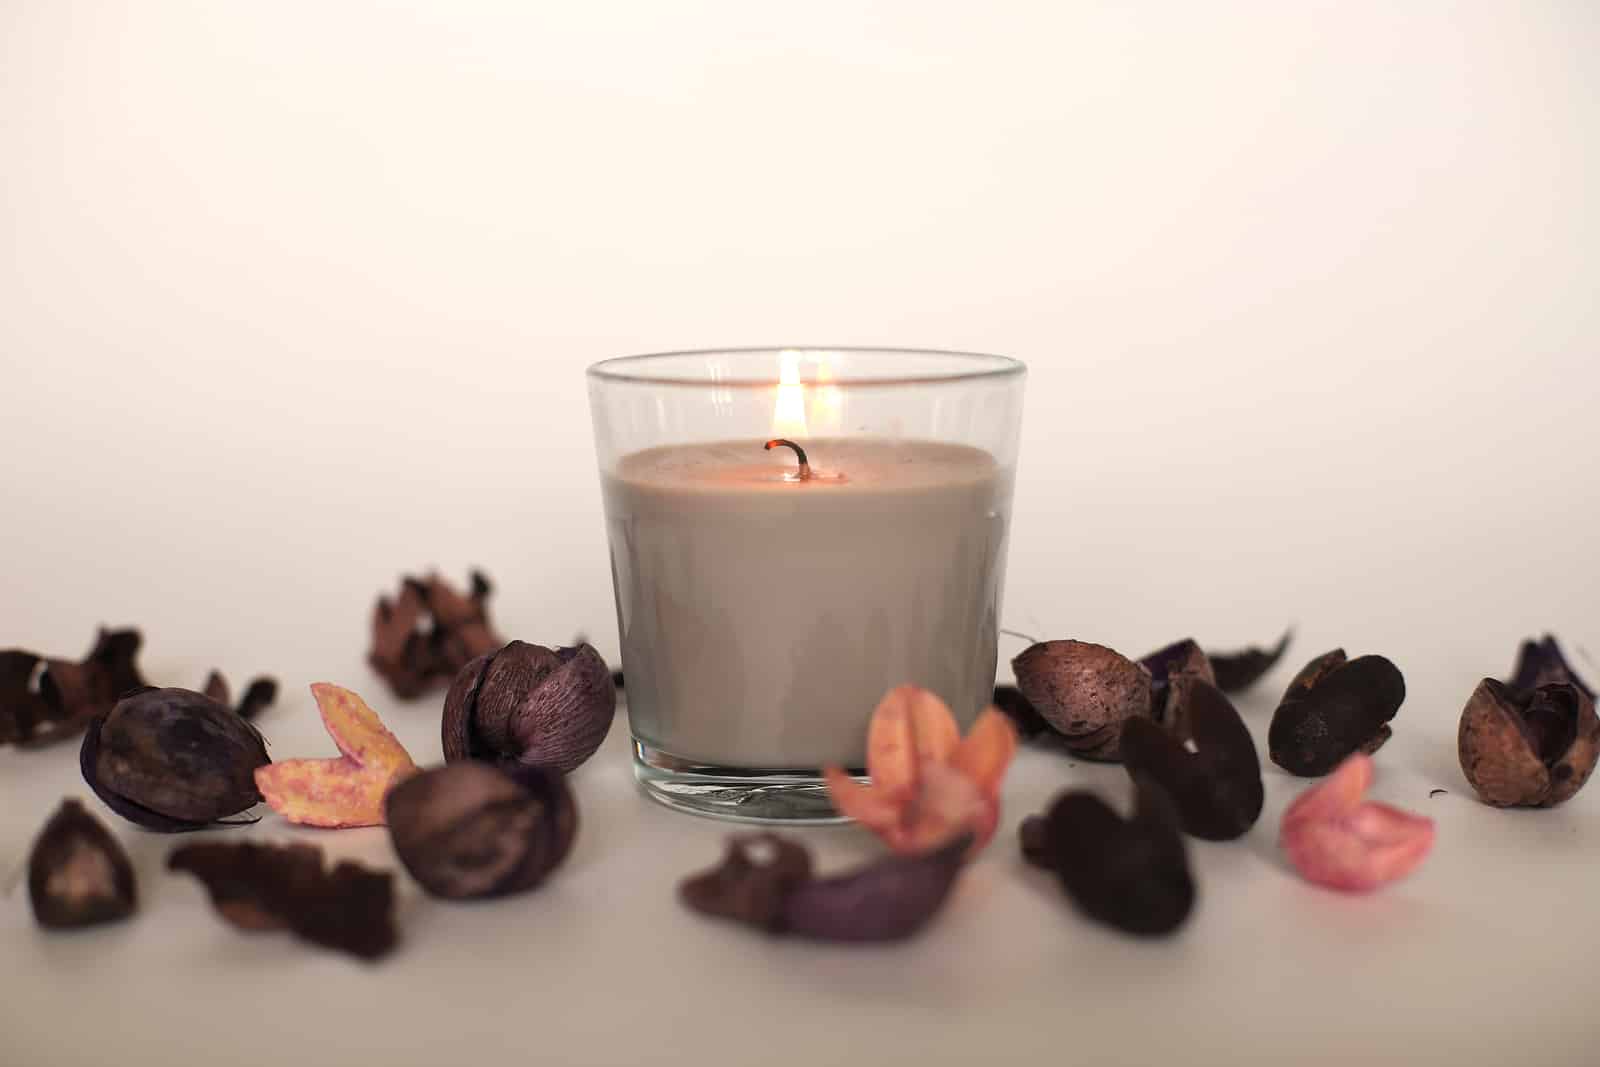 A candle in a glass with flowers scattered around, Mothers day gift